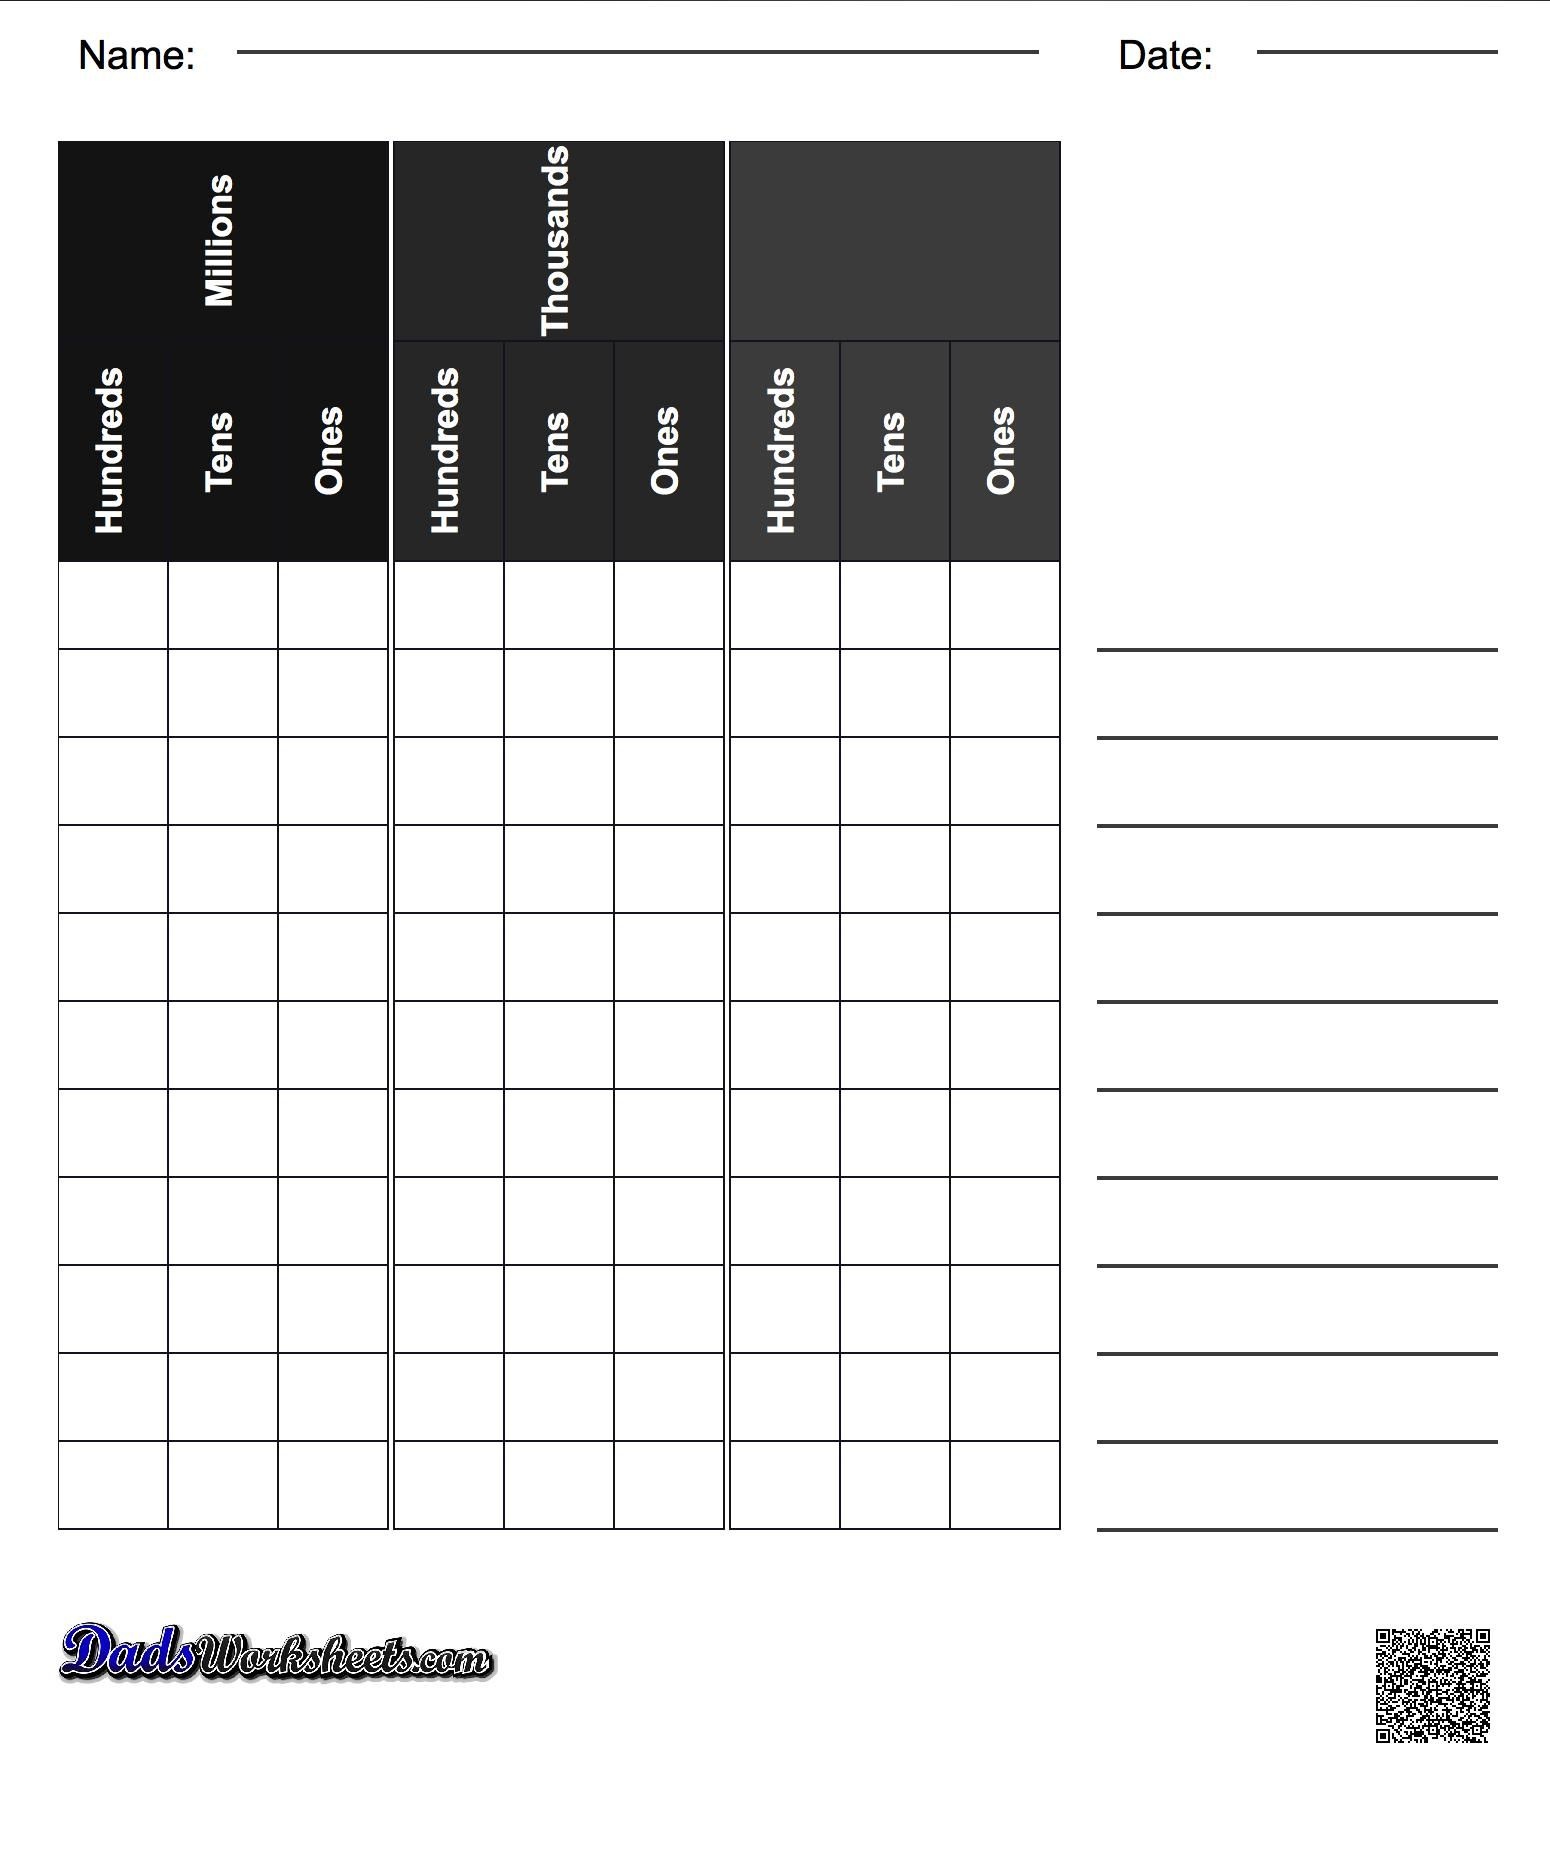 Place Value Charts, Printables In A Variety Of Formats, Plus - Free Printable Place Value Chart